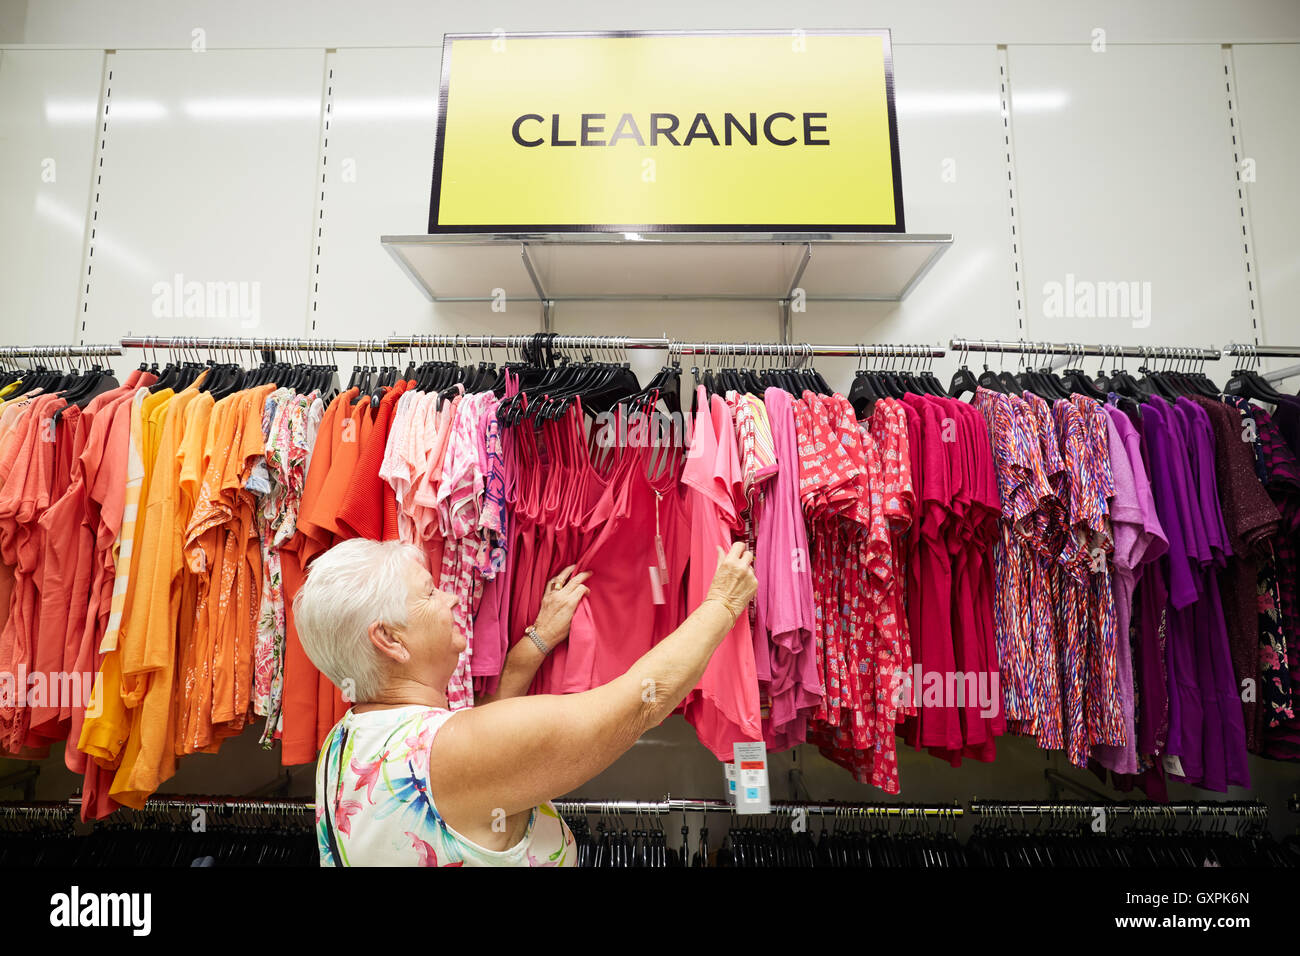 Interior view of people rummaging through the clearance department at outlet Marks and Spencer Lowry store in Salford Quays MediacityUK Manchester, Stock Photo